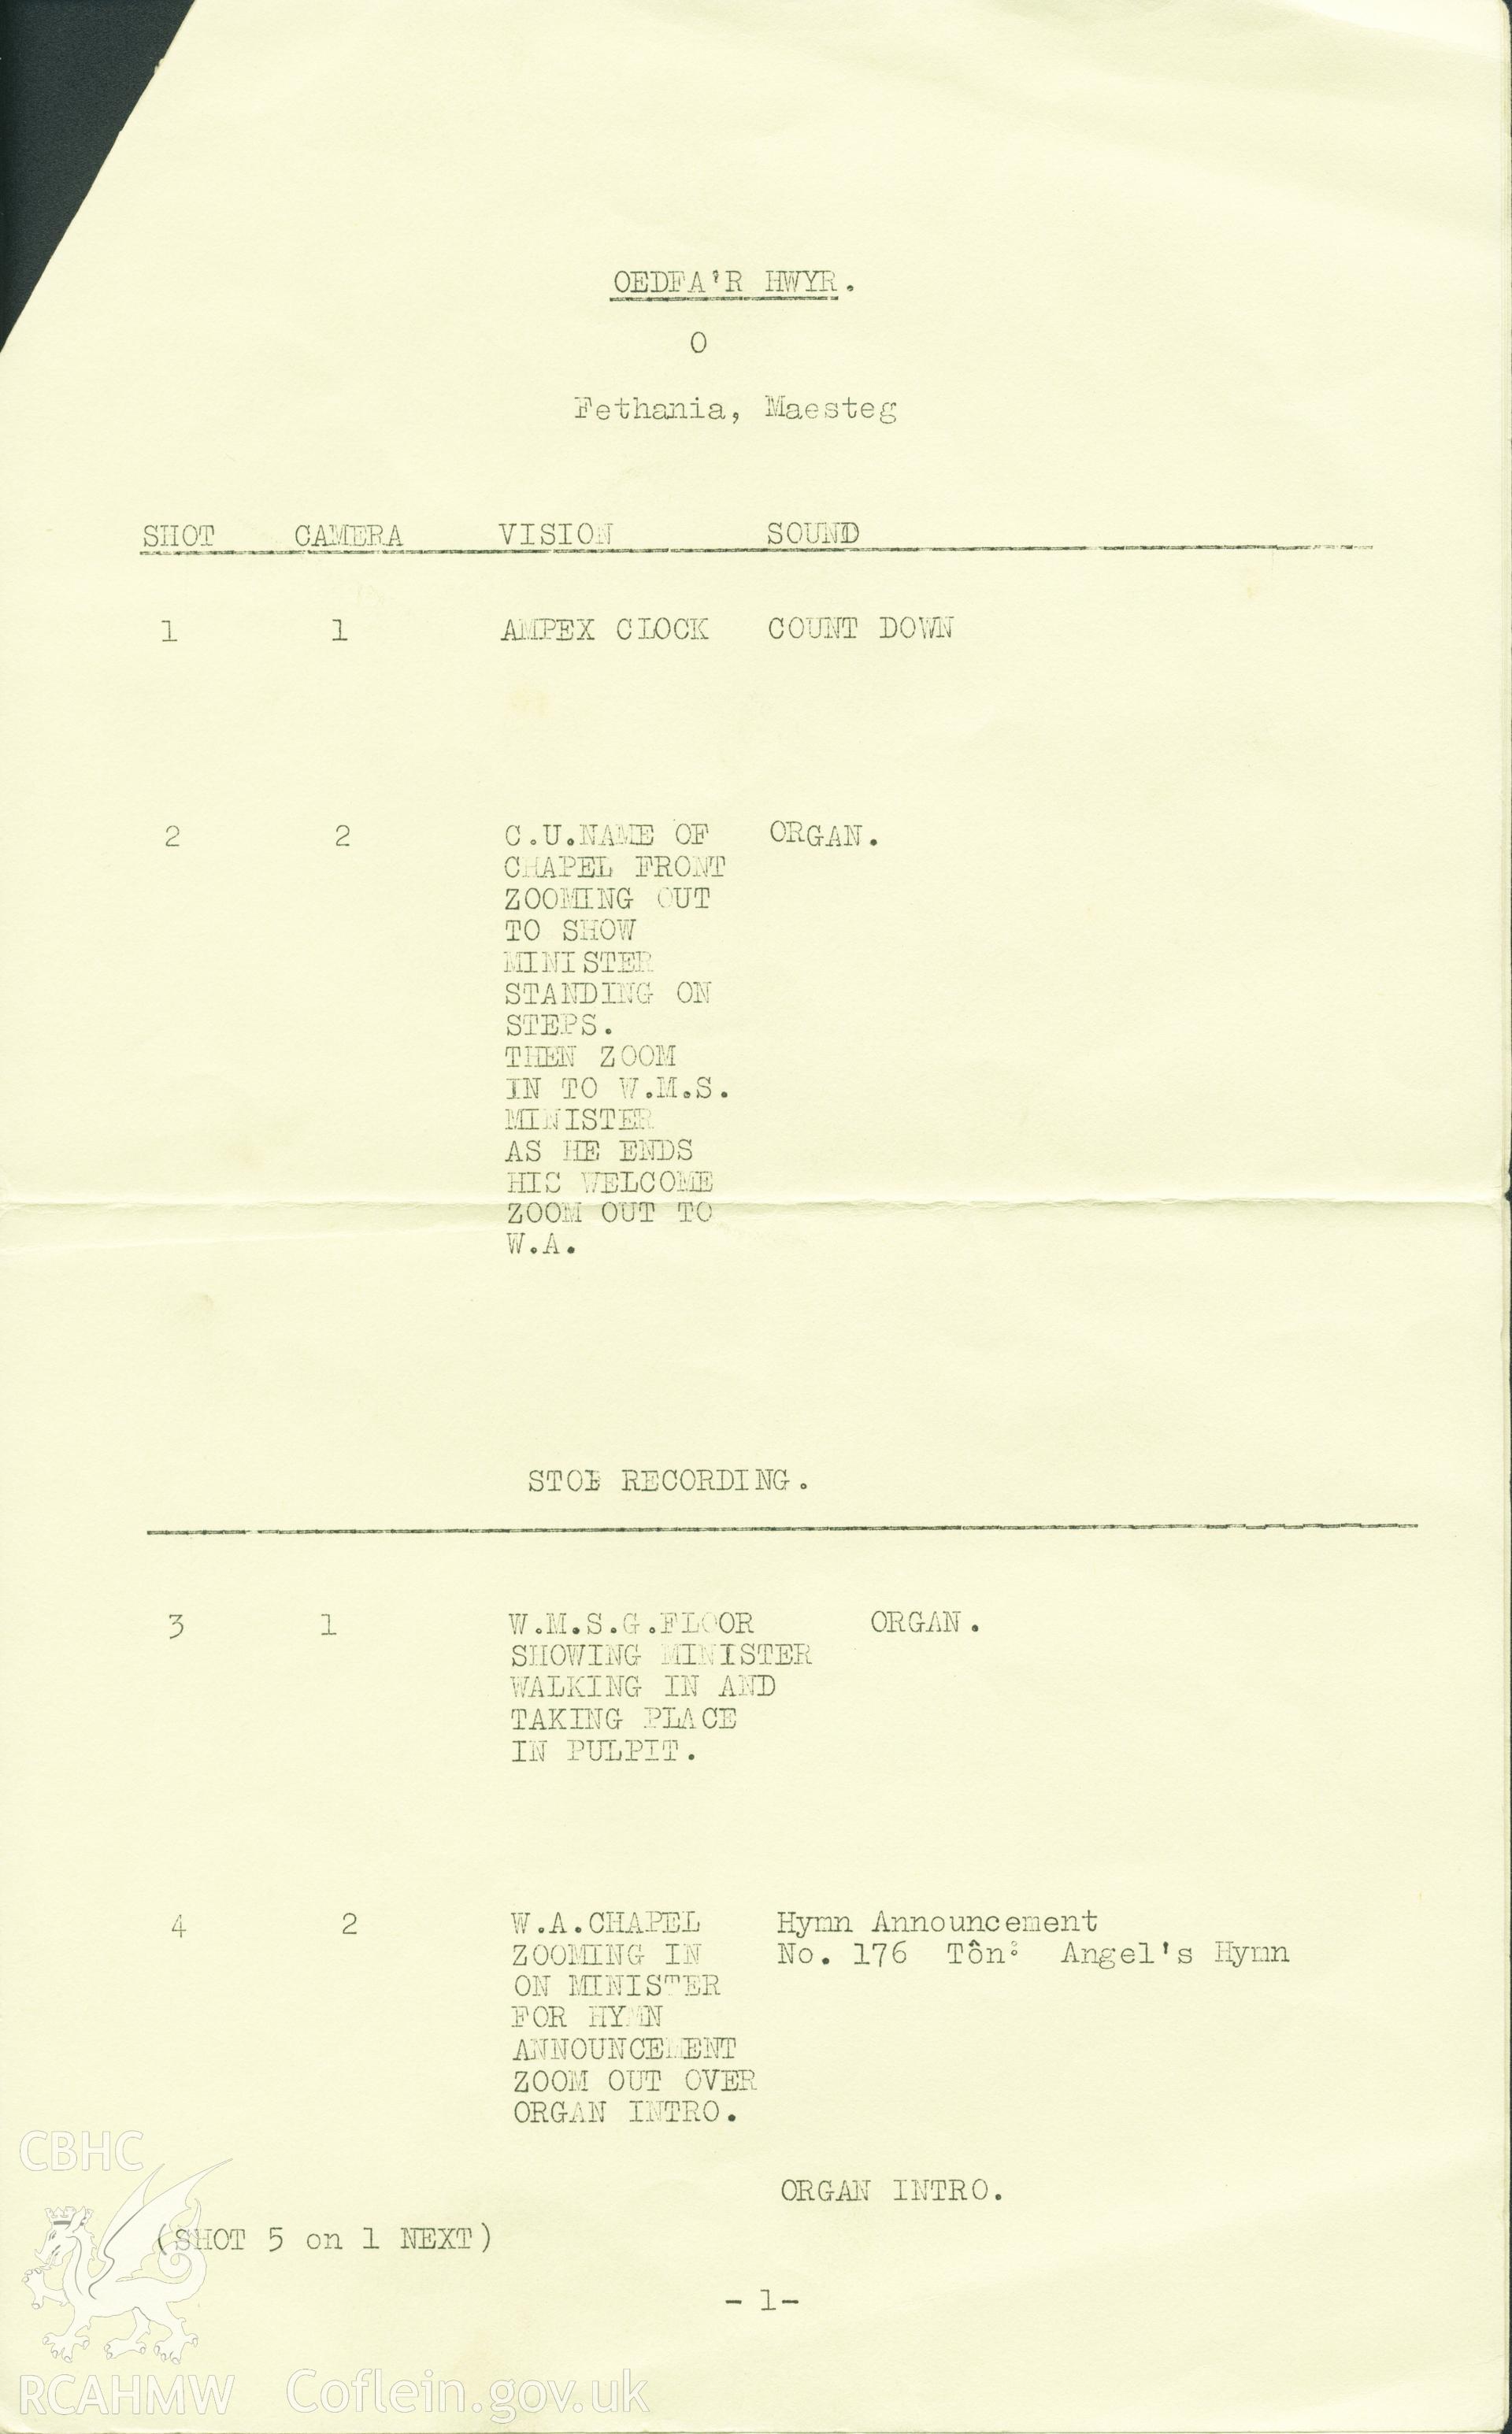 Copy of stage directions for cameraman recording service on 20th April 1967. Broadcast by the BBC on 3rd September, 1967. Donated to the RCAHMW by Cyril Philips as part of the Digital Dissent Project.